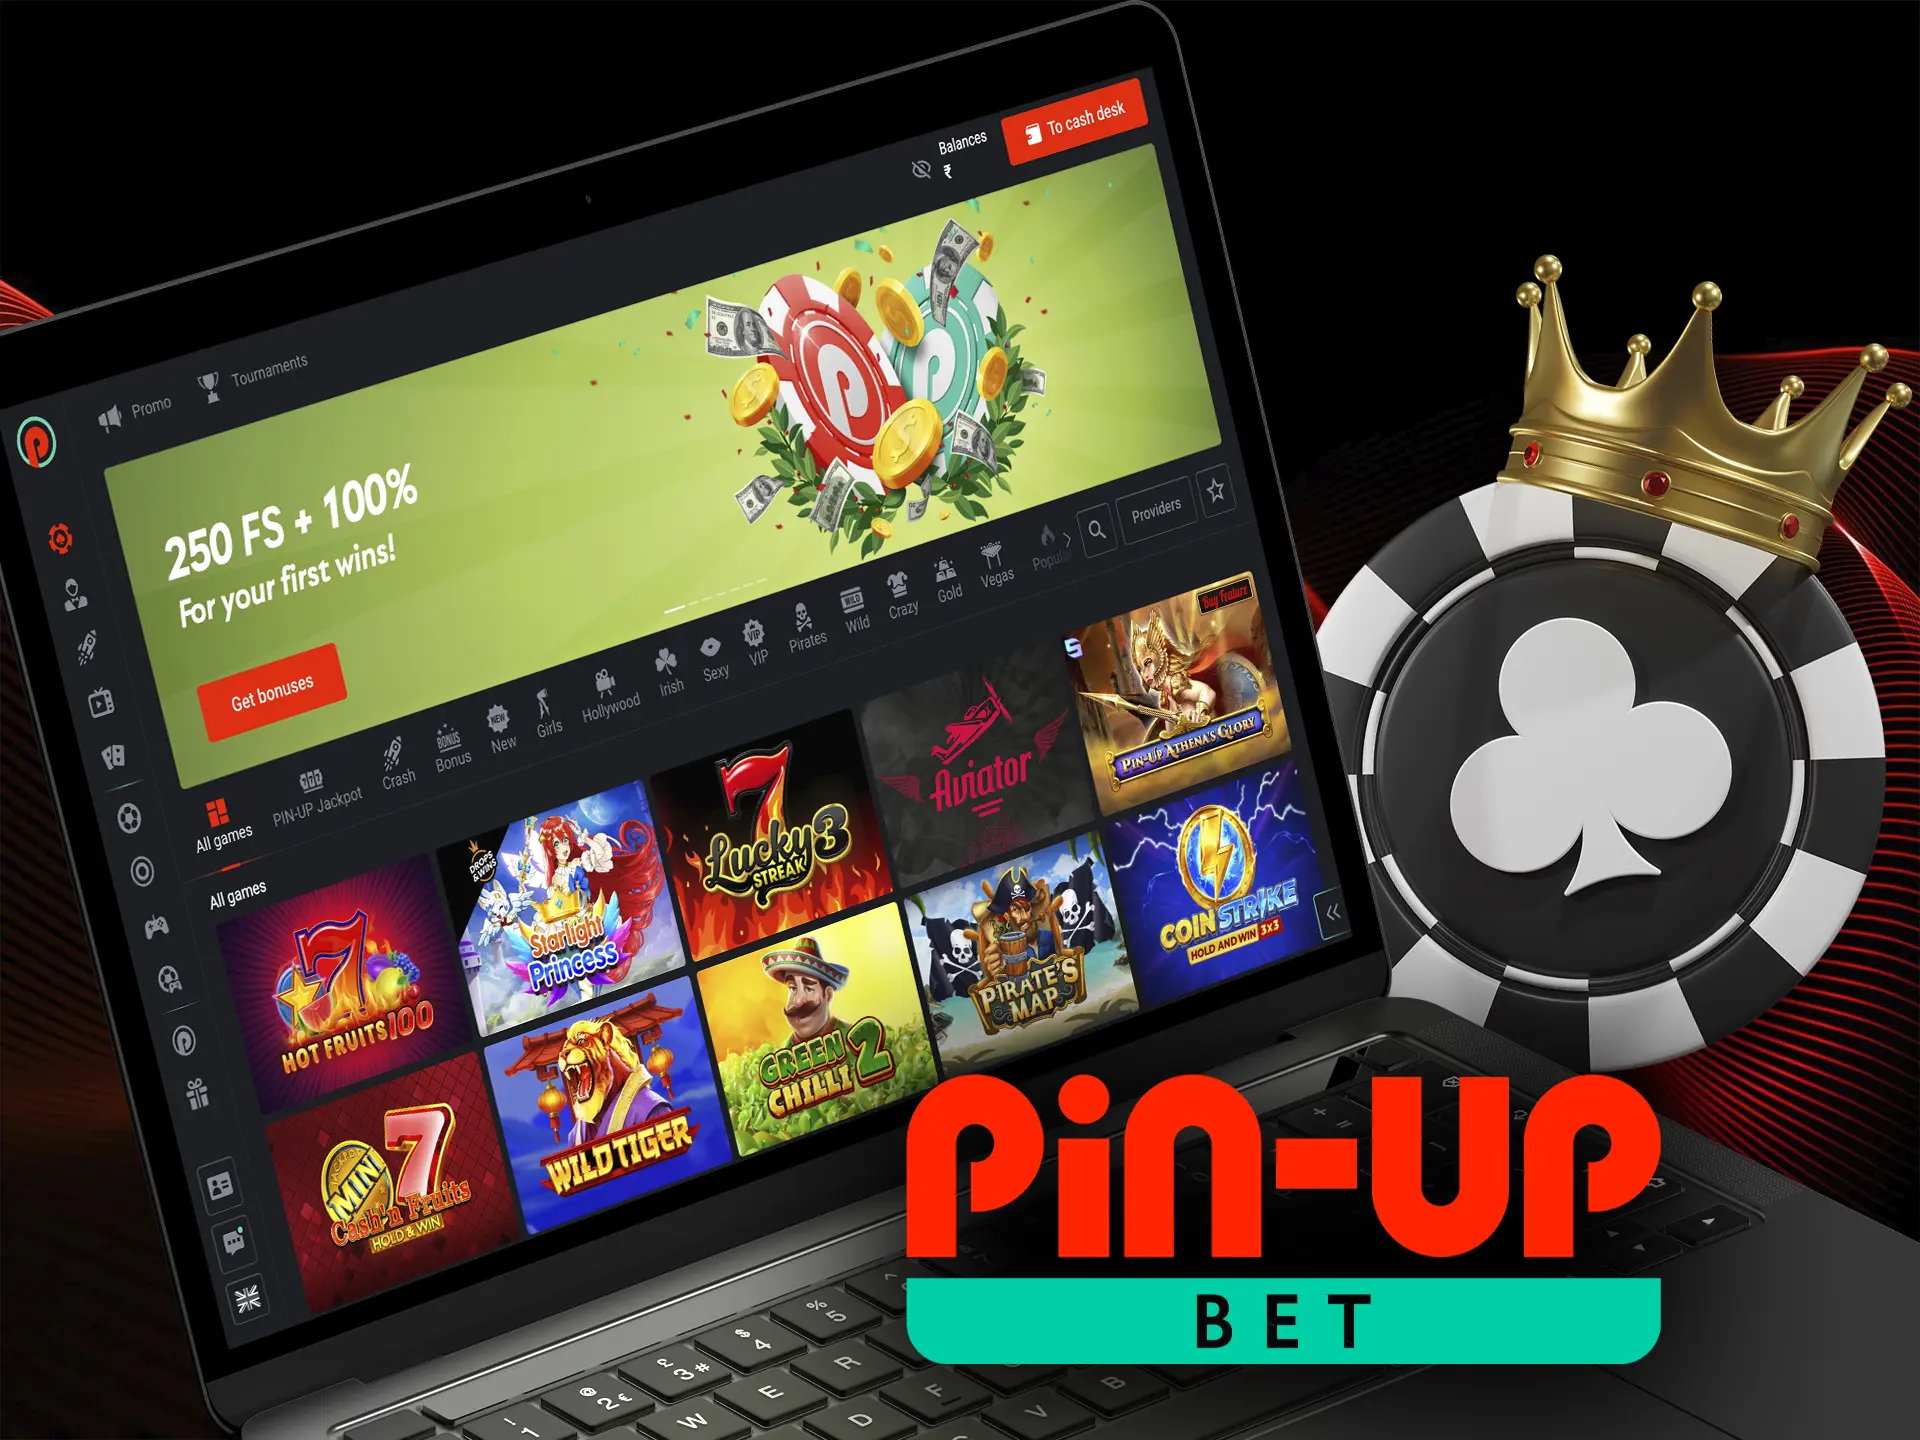 You can also play your favorite caino games at Pin Up casino.